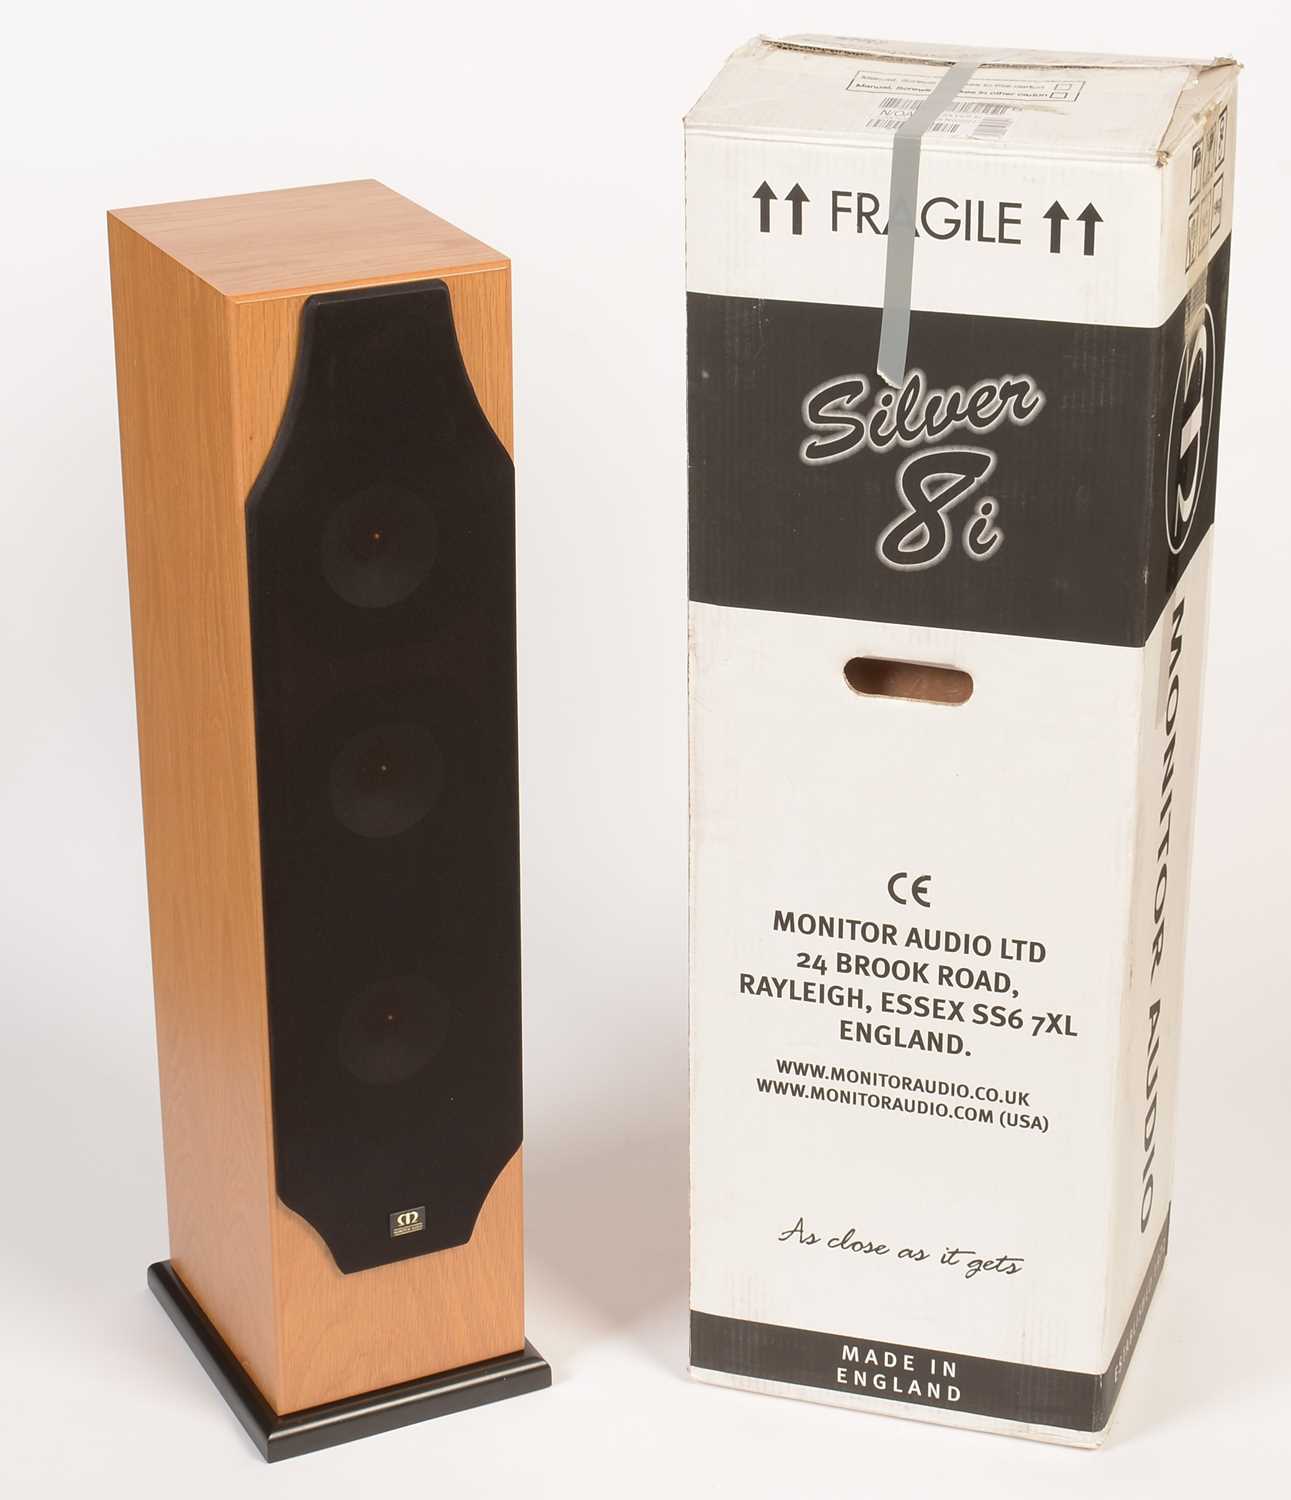 Lot 735 - A pair of Monitor Audio Limited floor standing speakers.